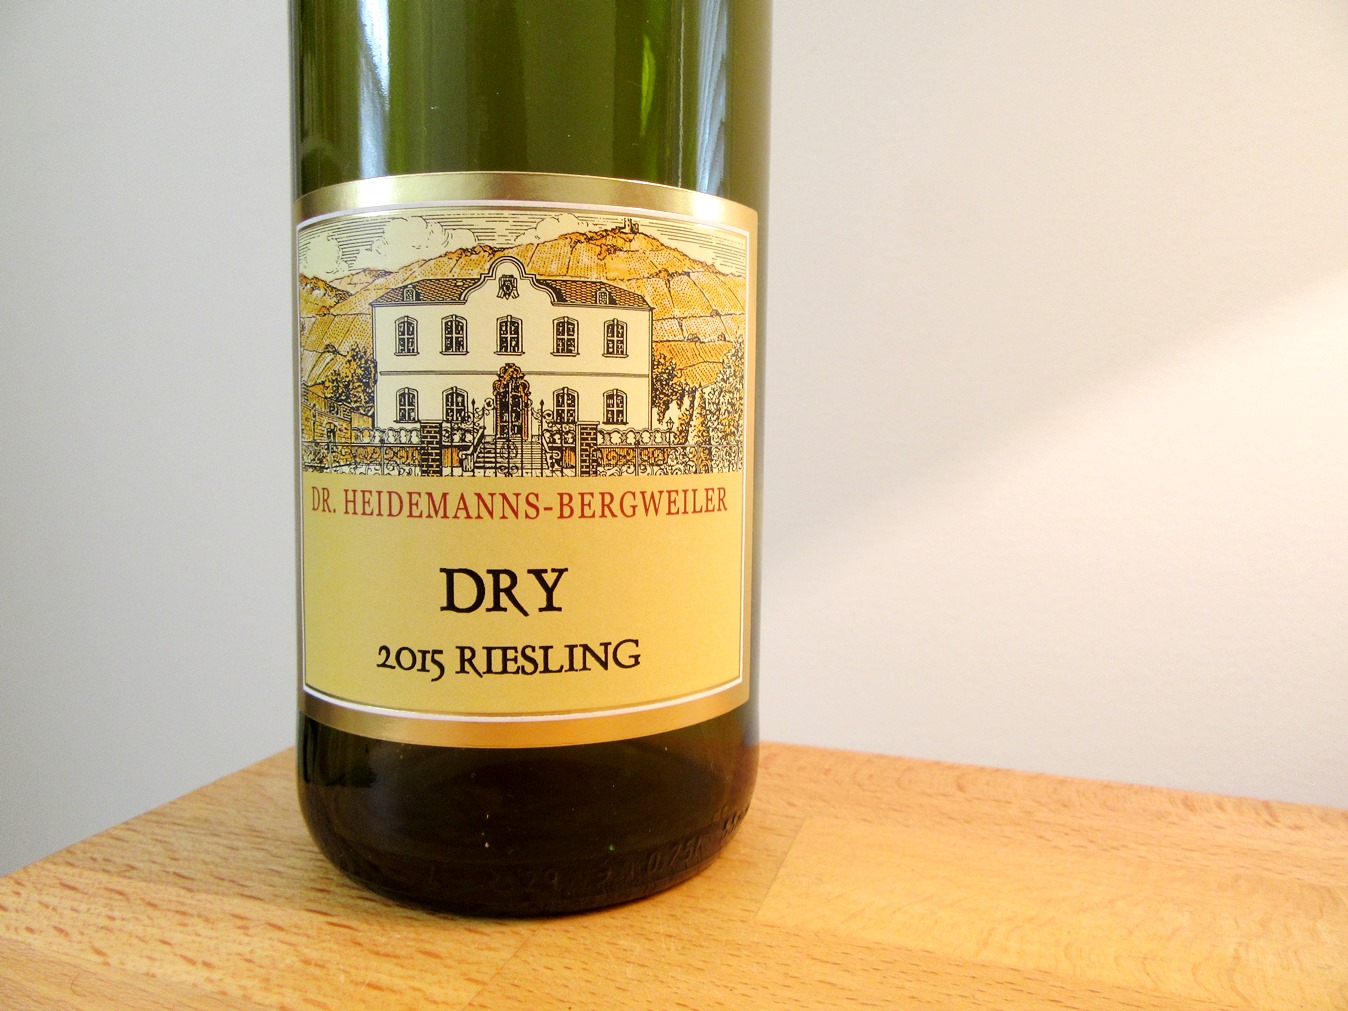 Dr. Heidemanns-Bergweiler, Dry Riesling 2015, Mosel, Germany, Wine Casual